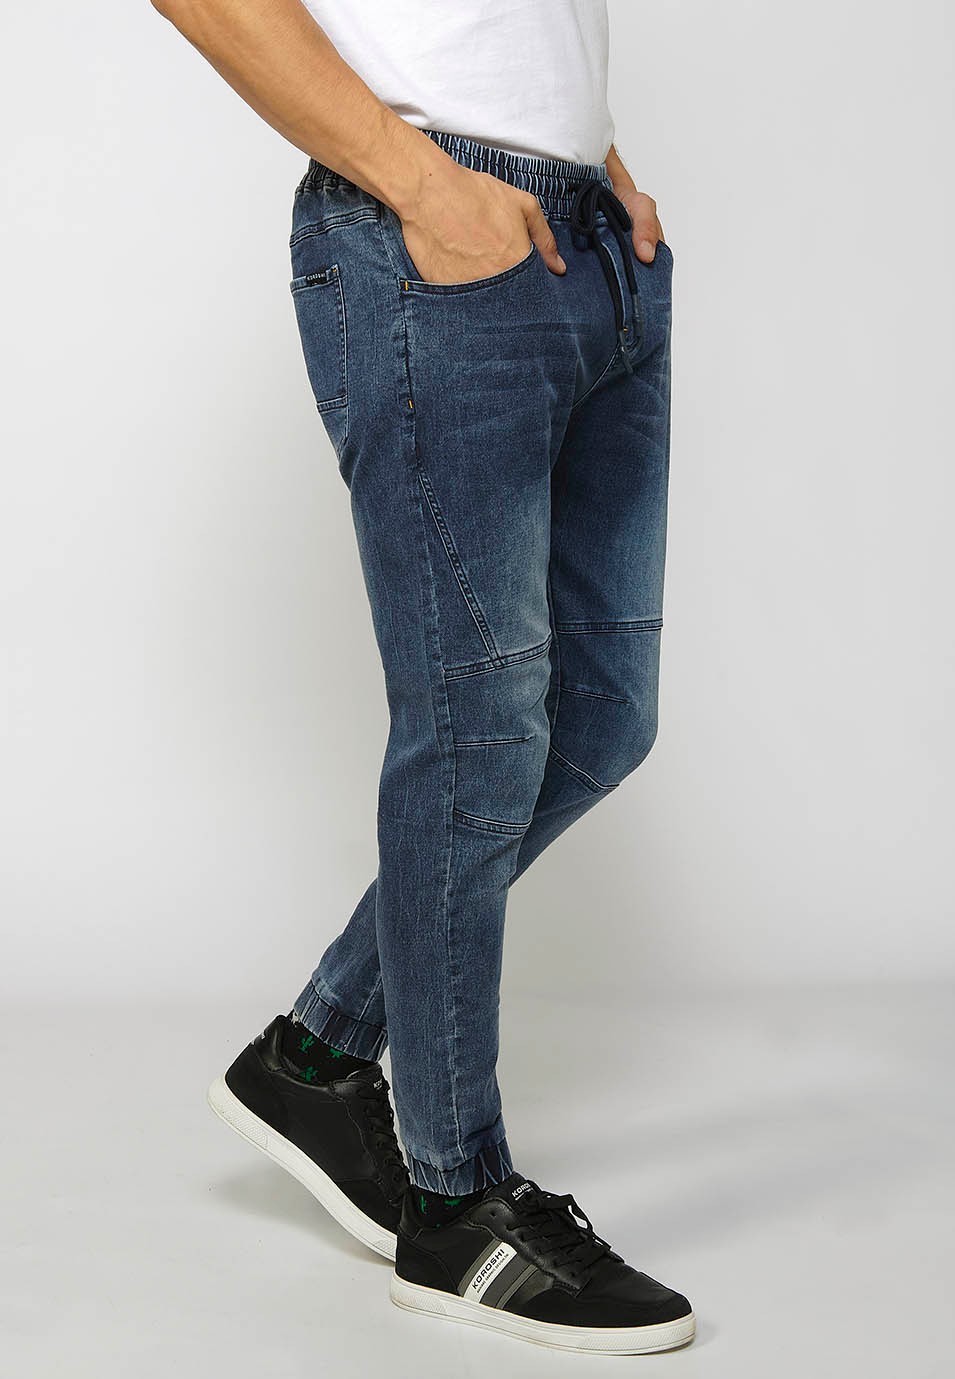 Long slim jogger pants fitted at the ankles with adjustable waist with elastic and drawstring in Blue for Men 2